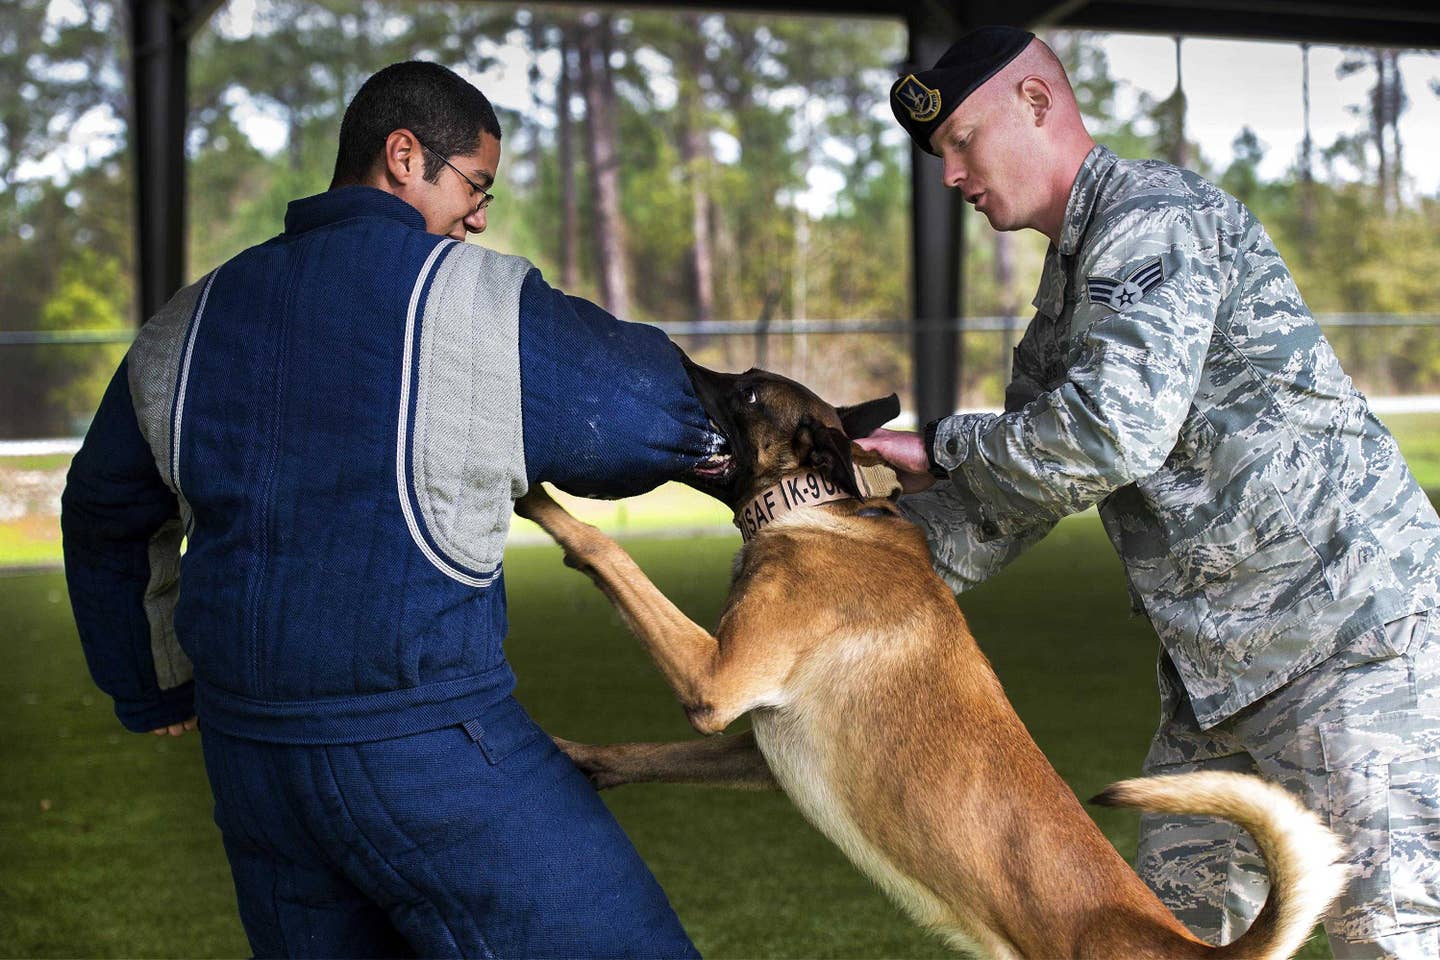 Air Force Senior Airman Anthony Hayes, right, holds Ttoby, a military working dog, as he bites Senior Airman Randle Williams during a demonstration at Moody Air Force Base, Ga., Feb. 2, 2017. Hayes and Williams are military dog handlers assigned to the 23d Security Forces Squadron. Ttoby is a Belgian Malinois and specializes in personnel protection and detecting explosives, trained as a military dog at Joint Base San Antonio-Lackland, Texas. (Air Force photo by Tech. Sgt. Zachary Wolf)